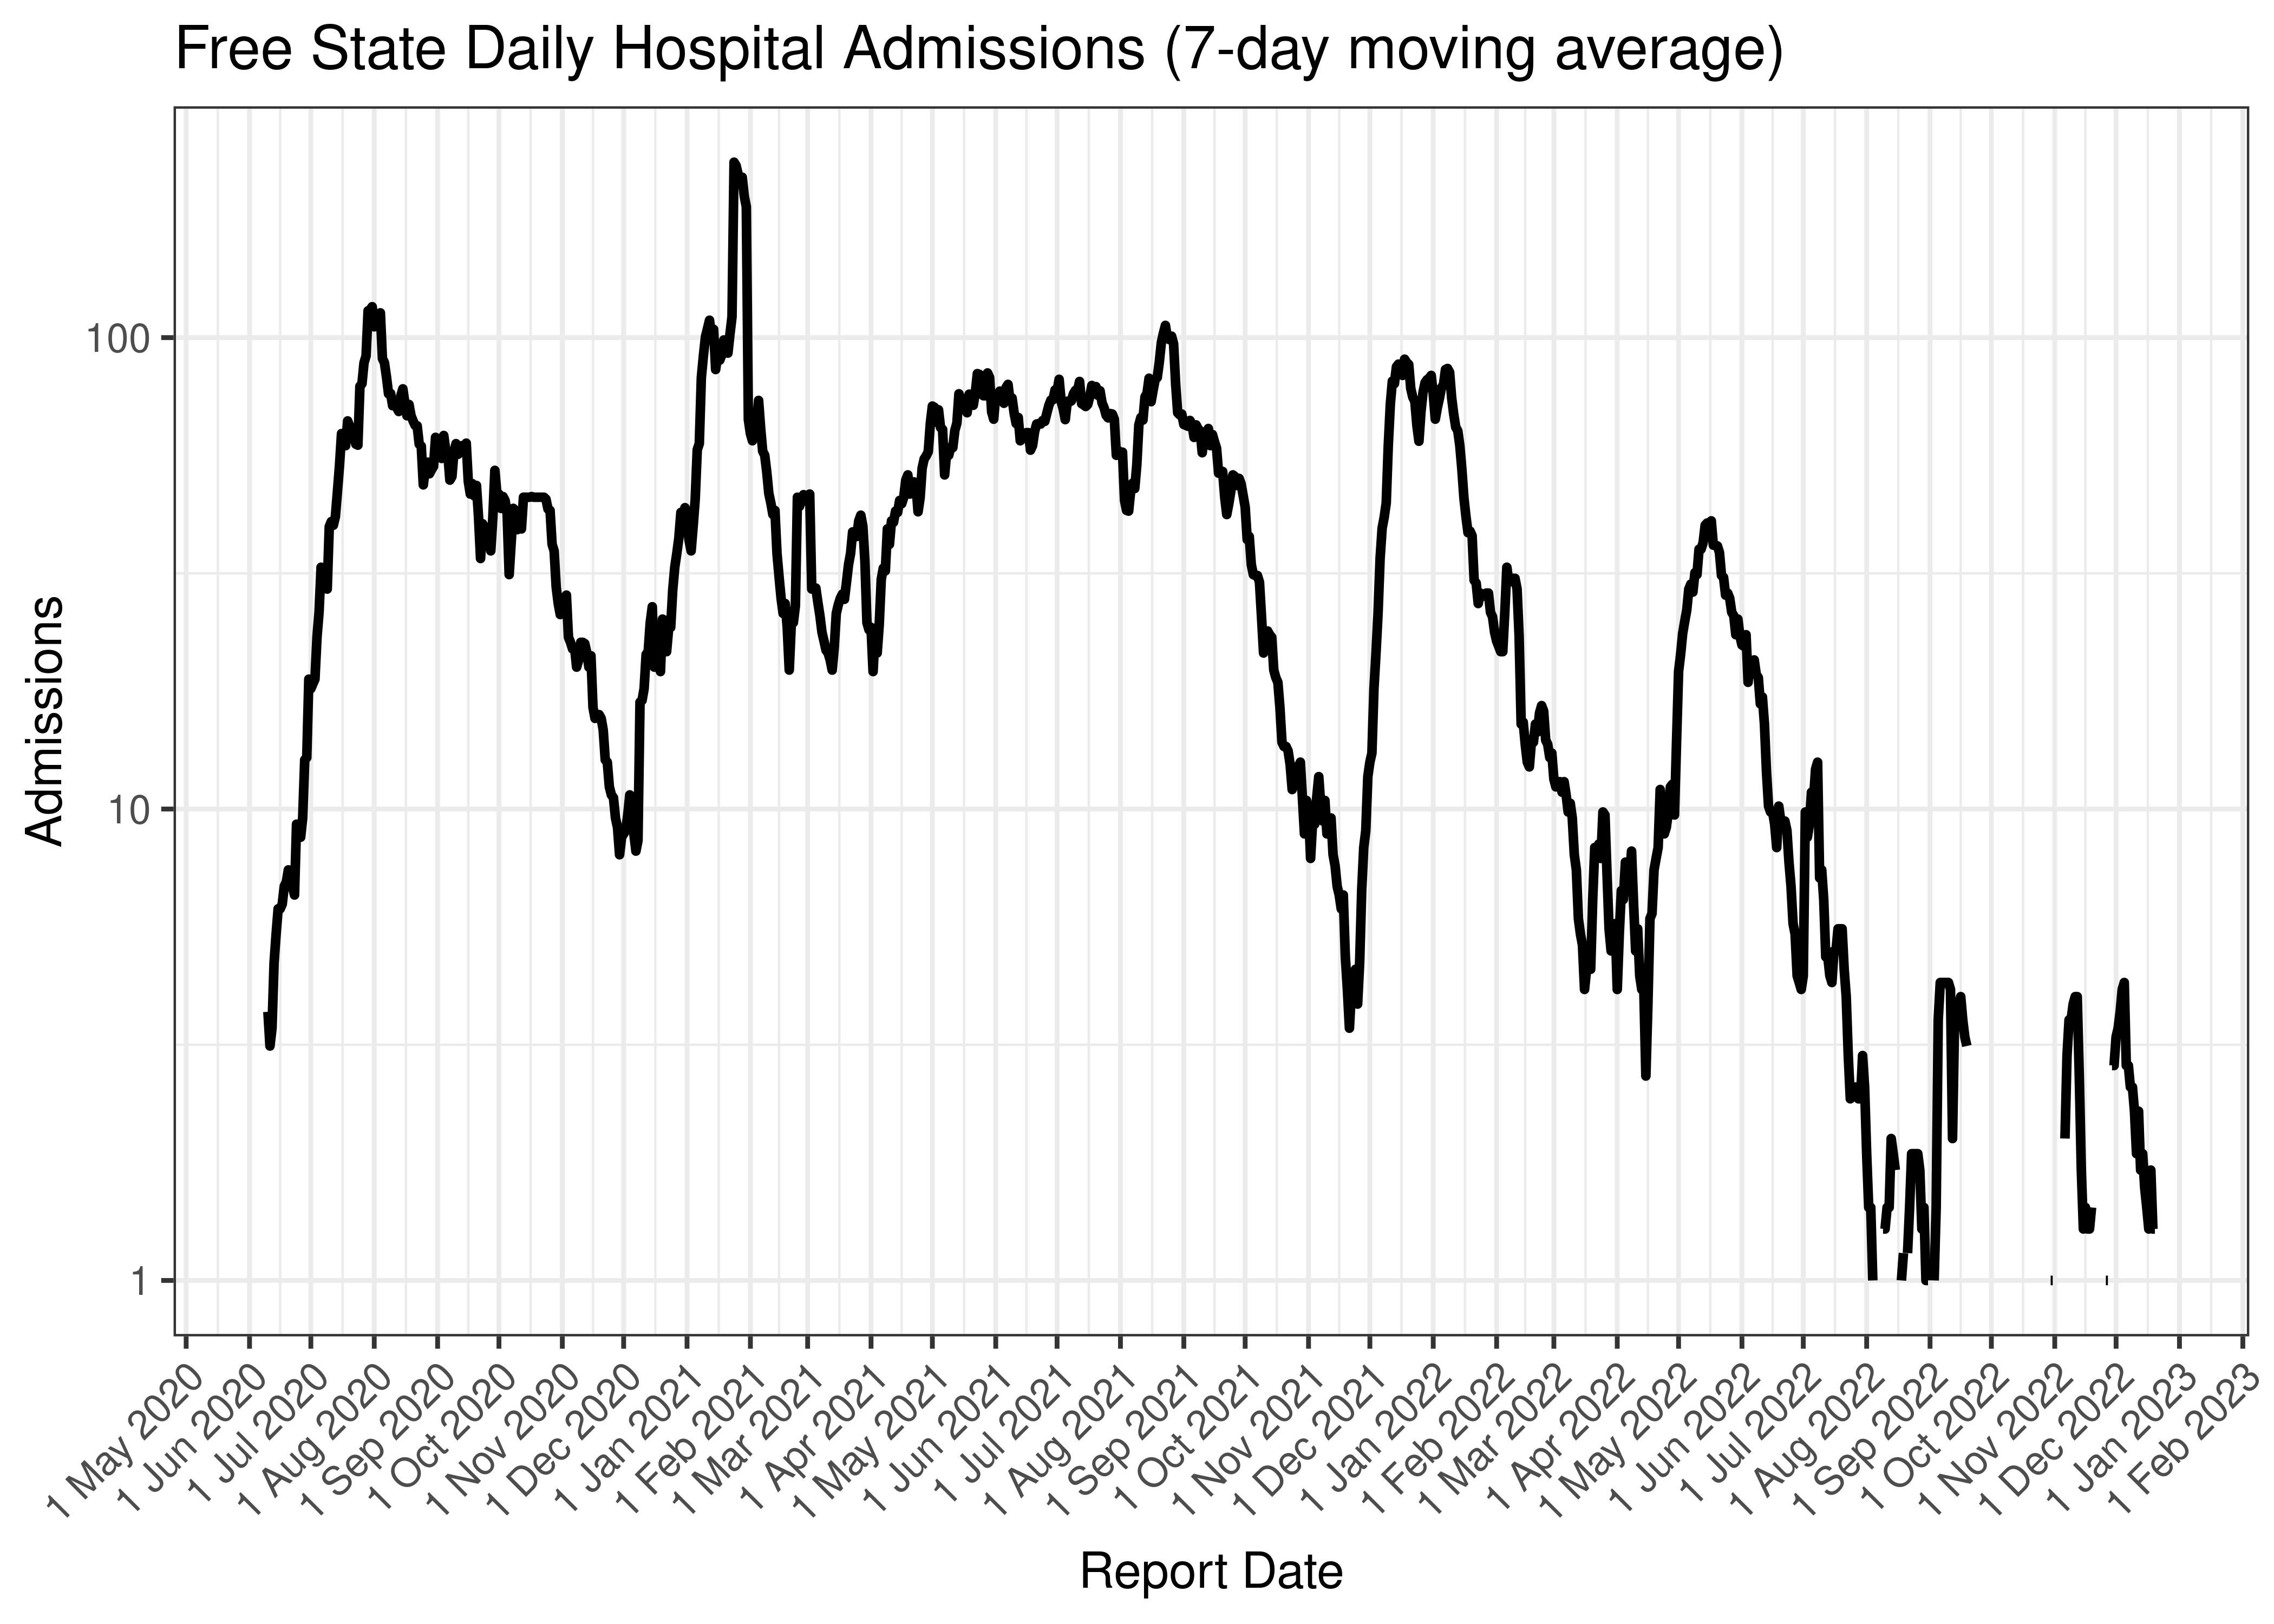 Free State Daily Hospital Admissions (7-day moving average)